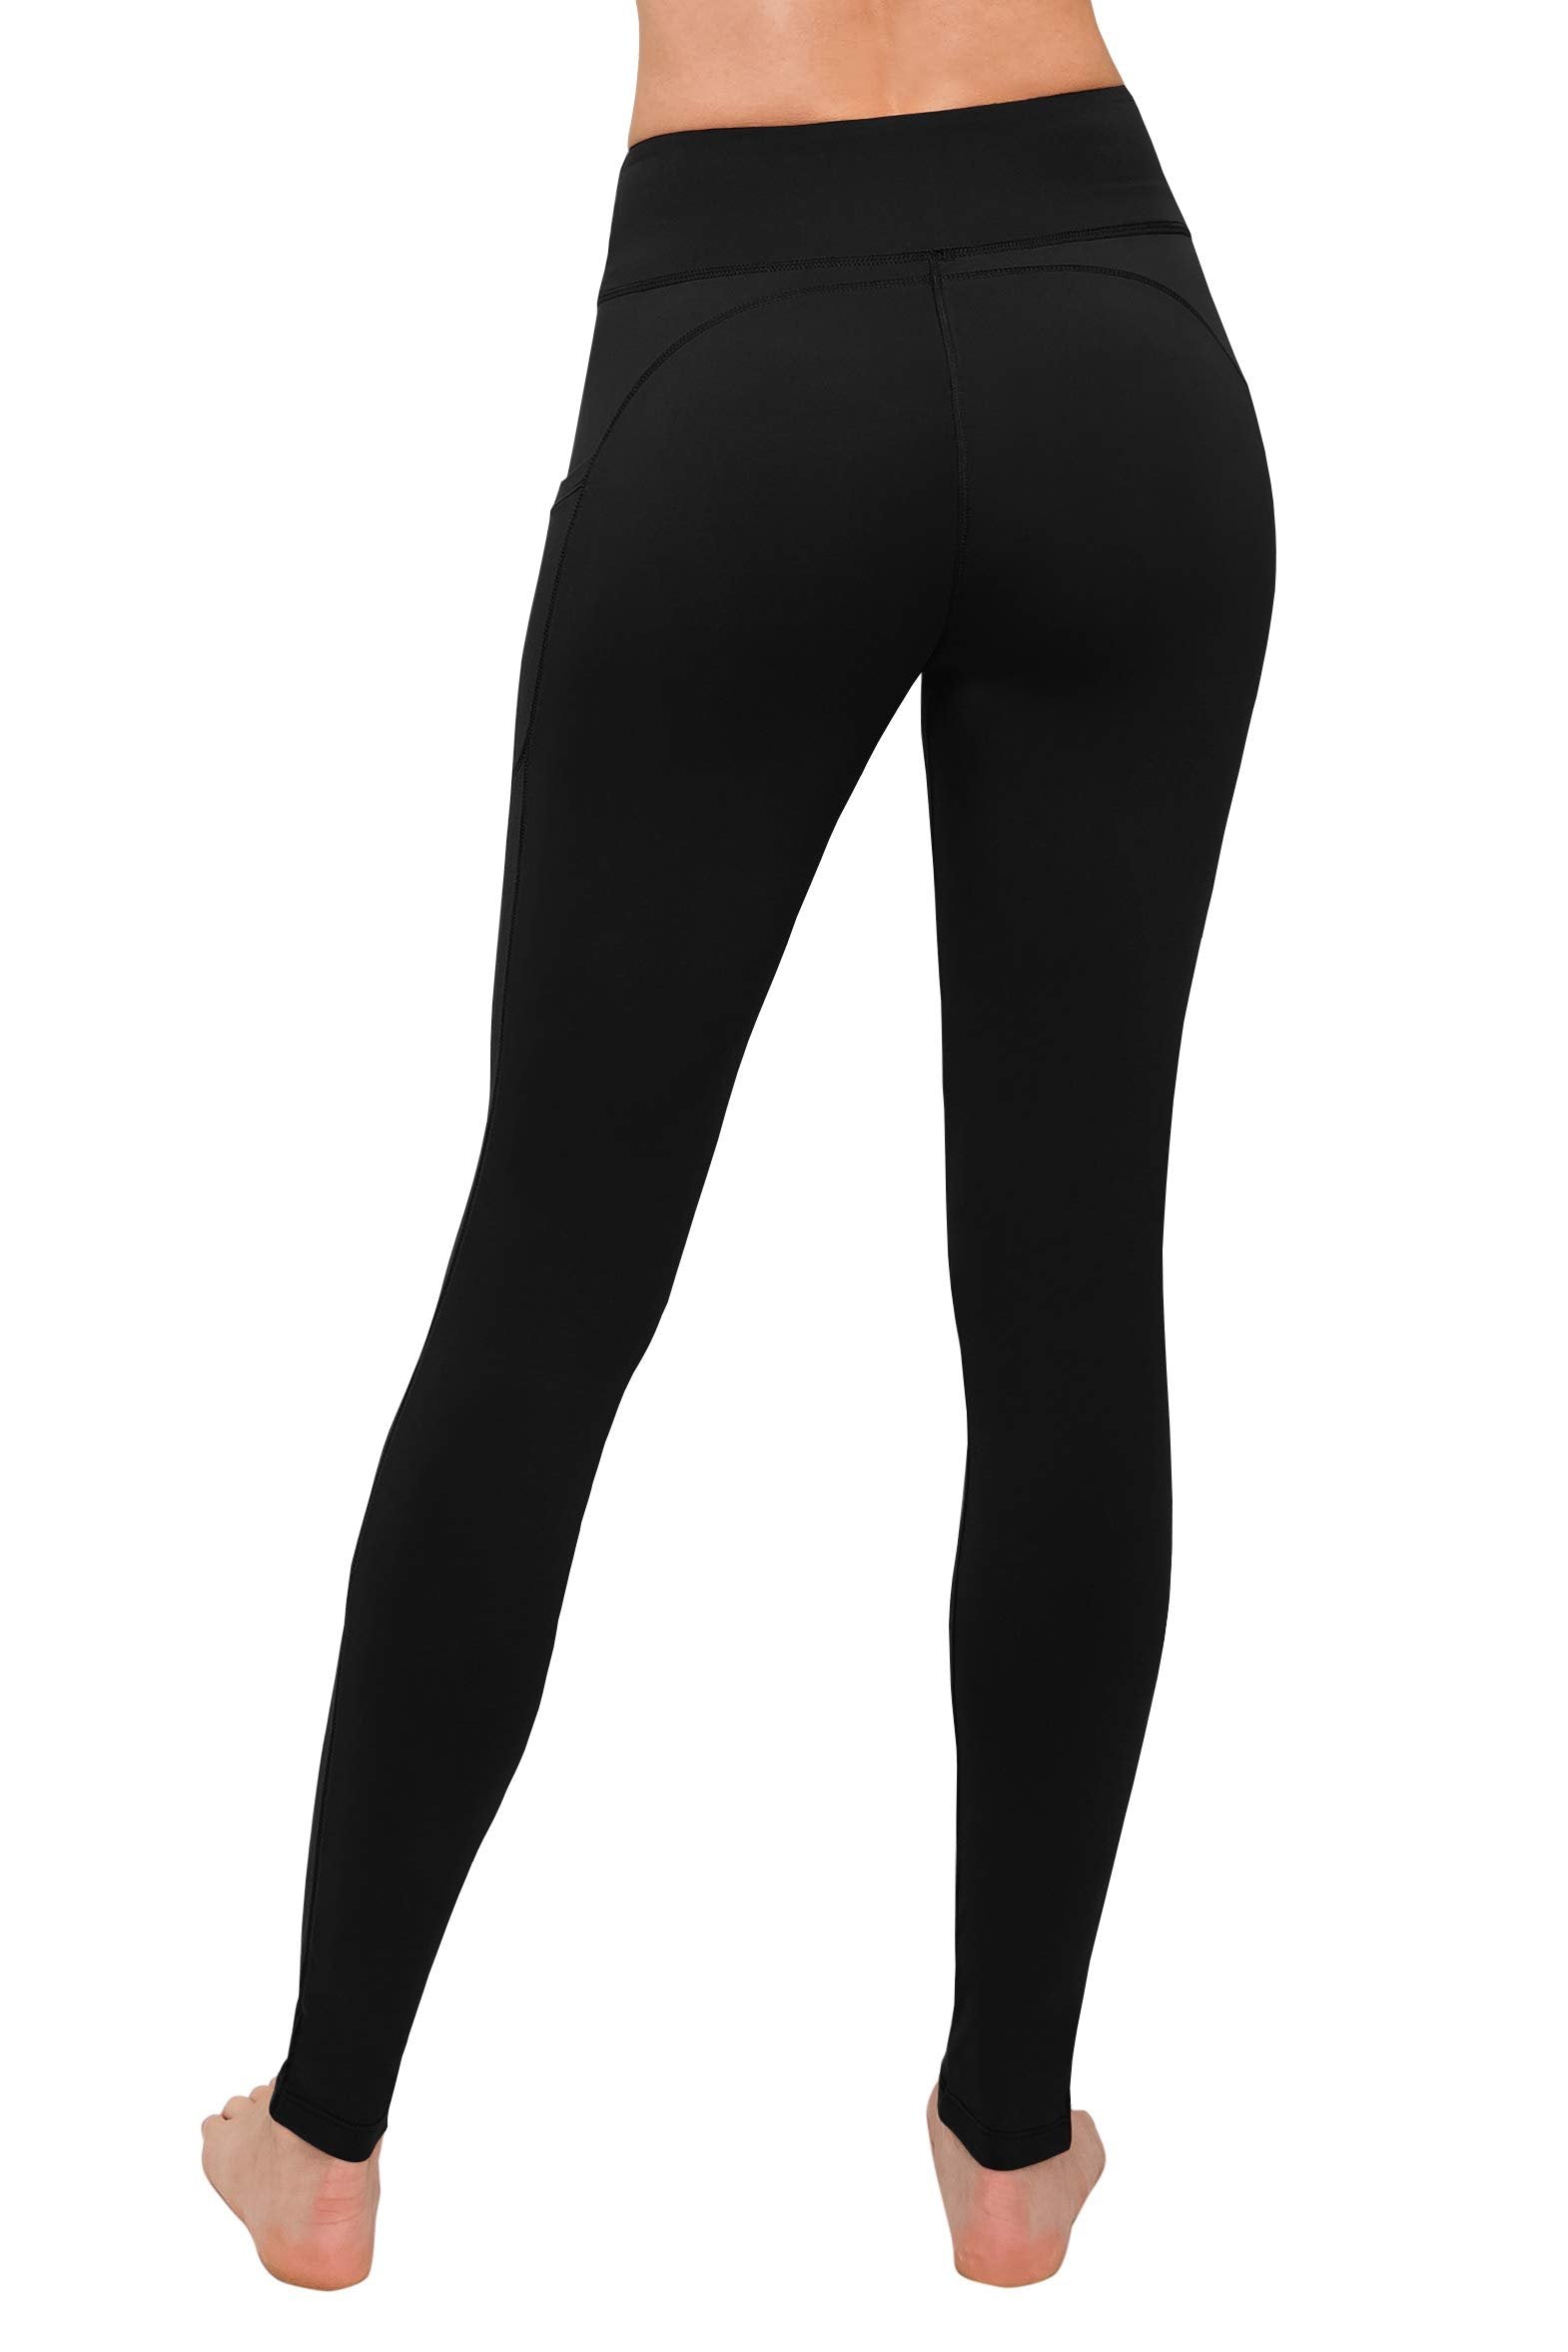 Black High Waisted Leggings with Pockets for Plus Size Women | SATINA Yoga Workout Pants with 3 Waistband